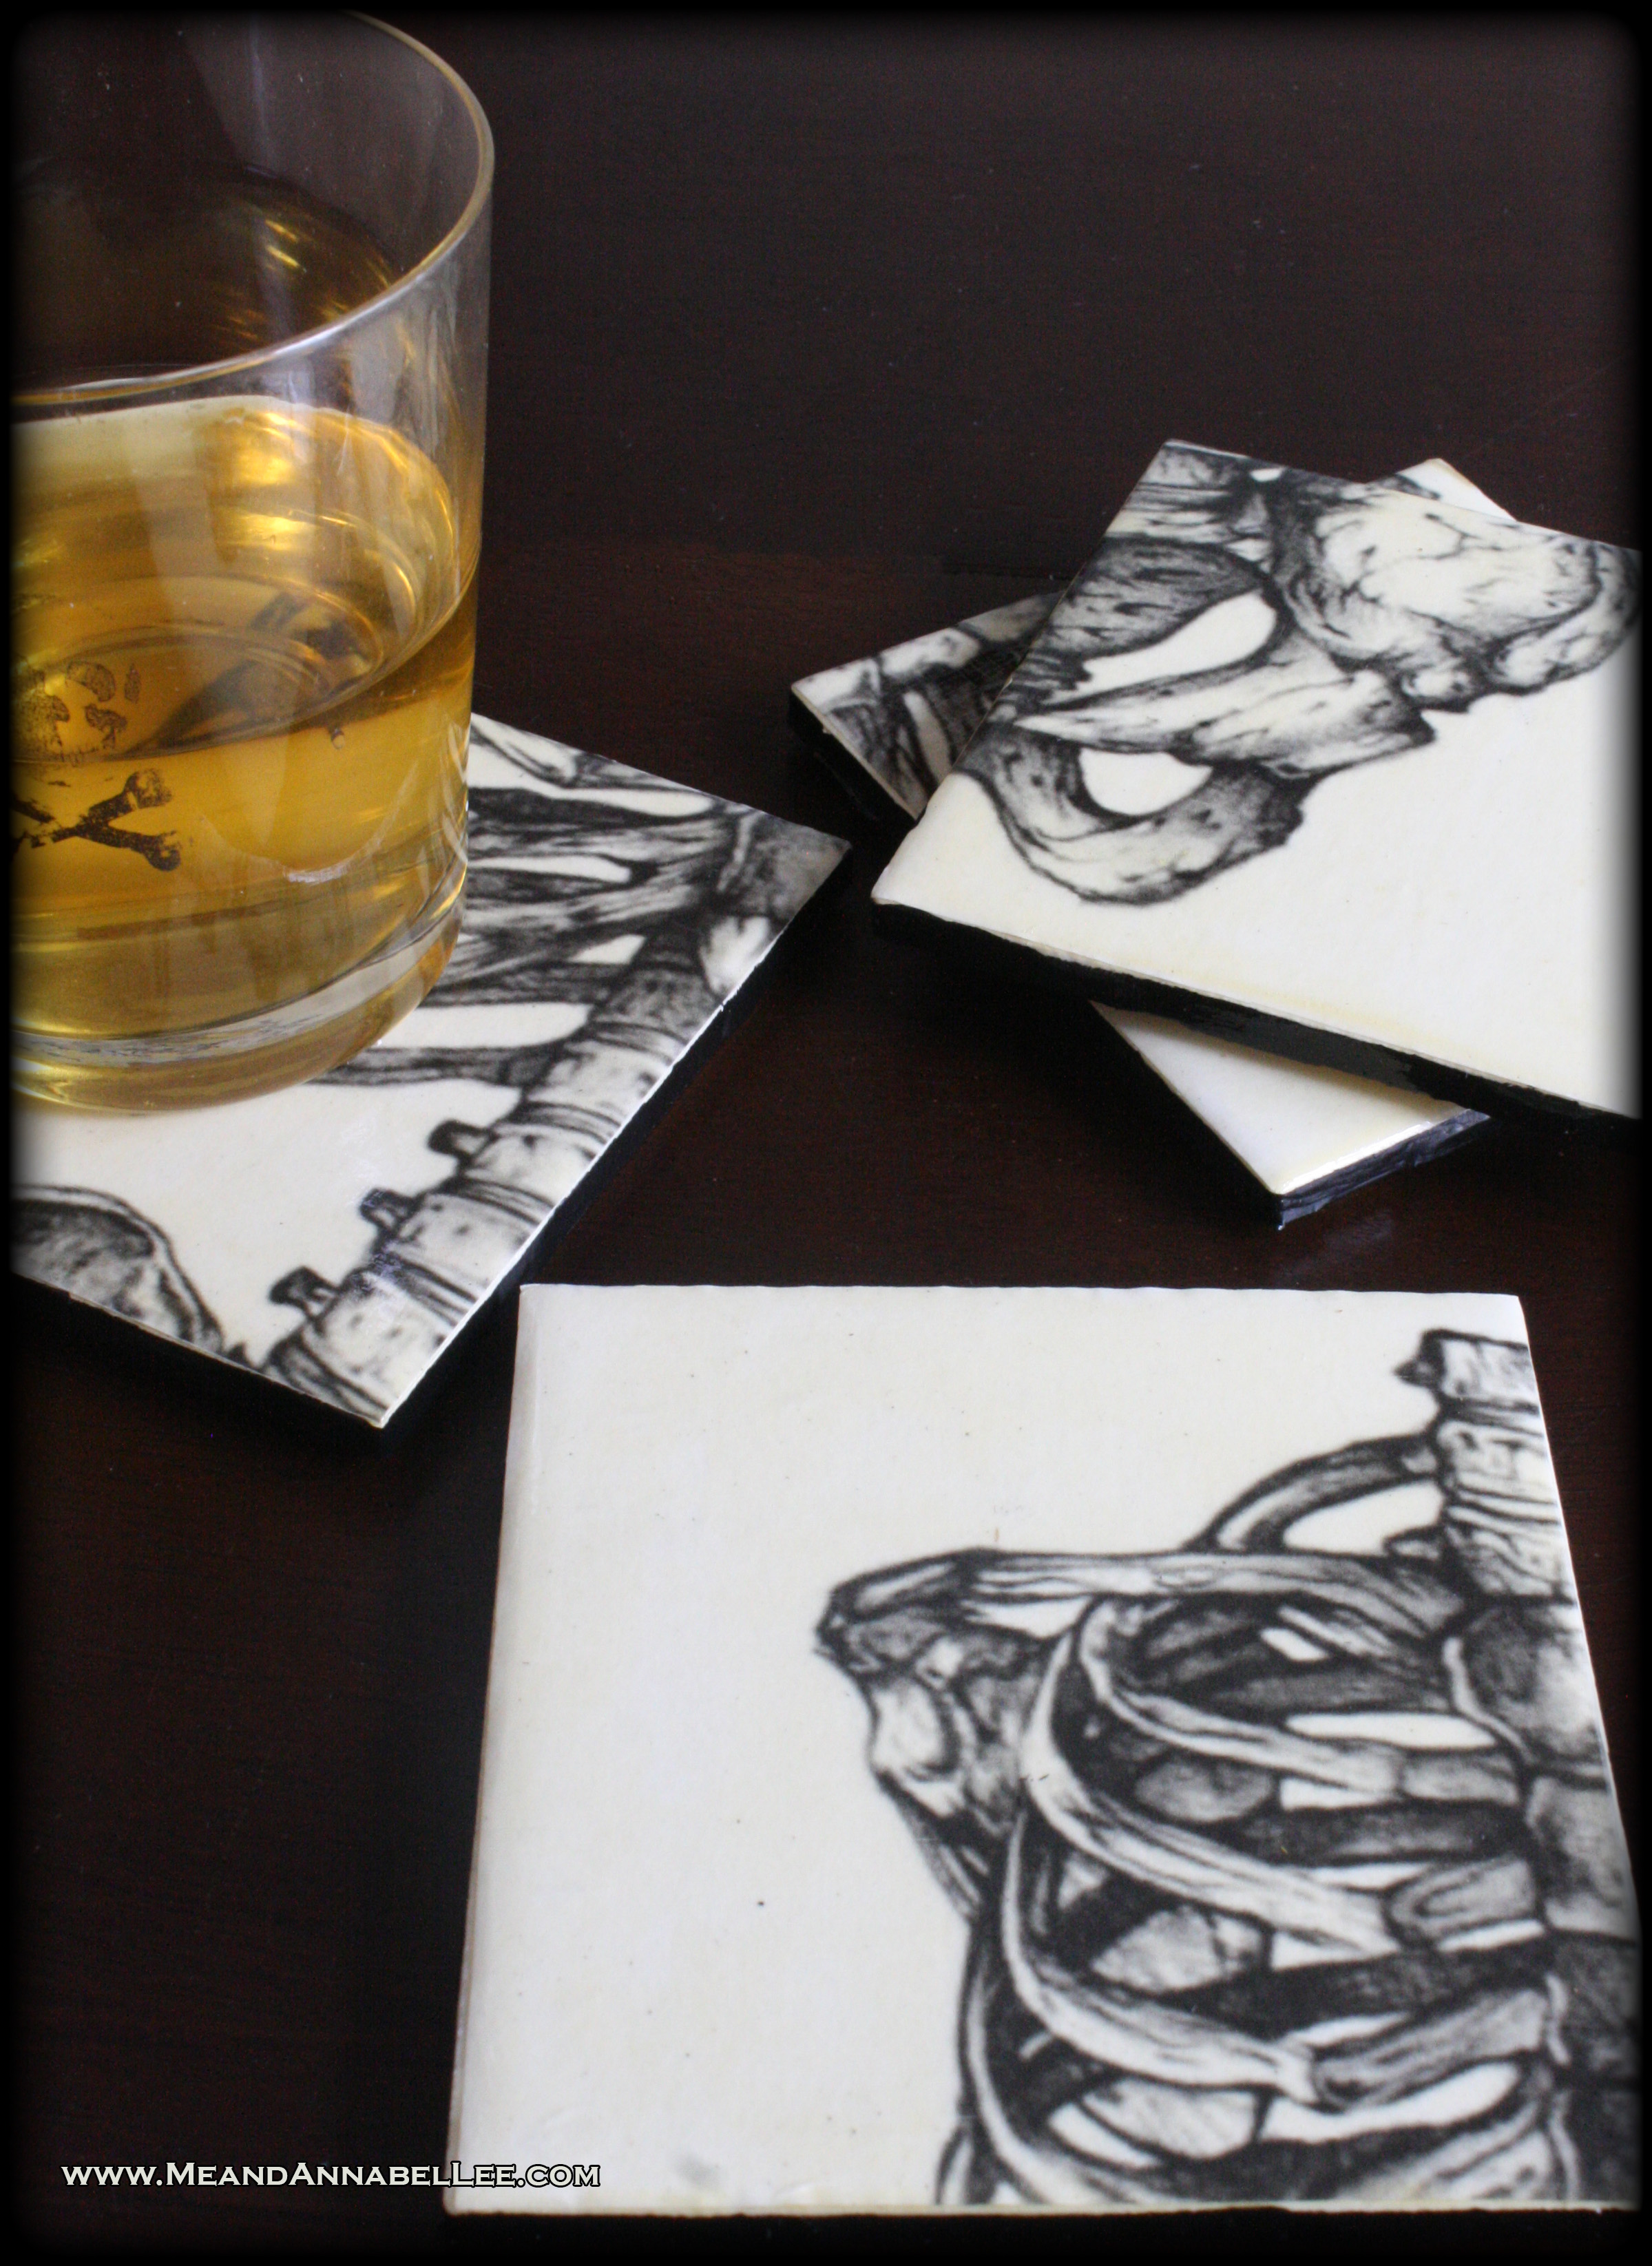 Transform 4 x 4 Wall Tiles into Gothic Drink Coasters | Skeletal Torso Puzzle | Goth it Yourself | Anatomical Skeleton Image Transfer | www.MeandAnnabelLee.com